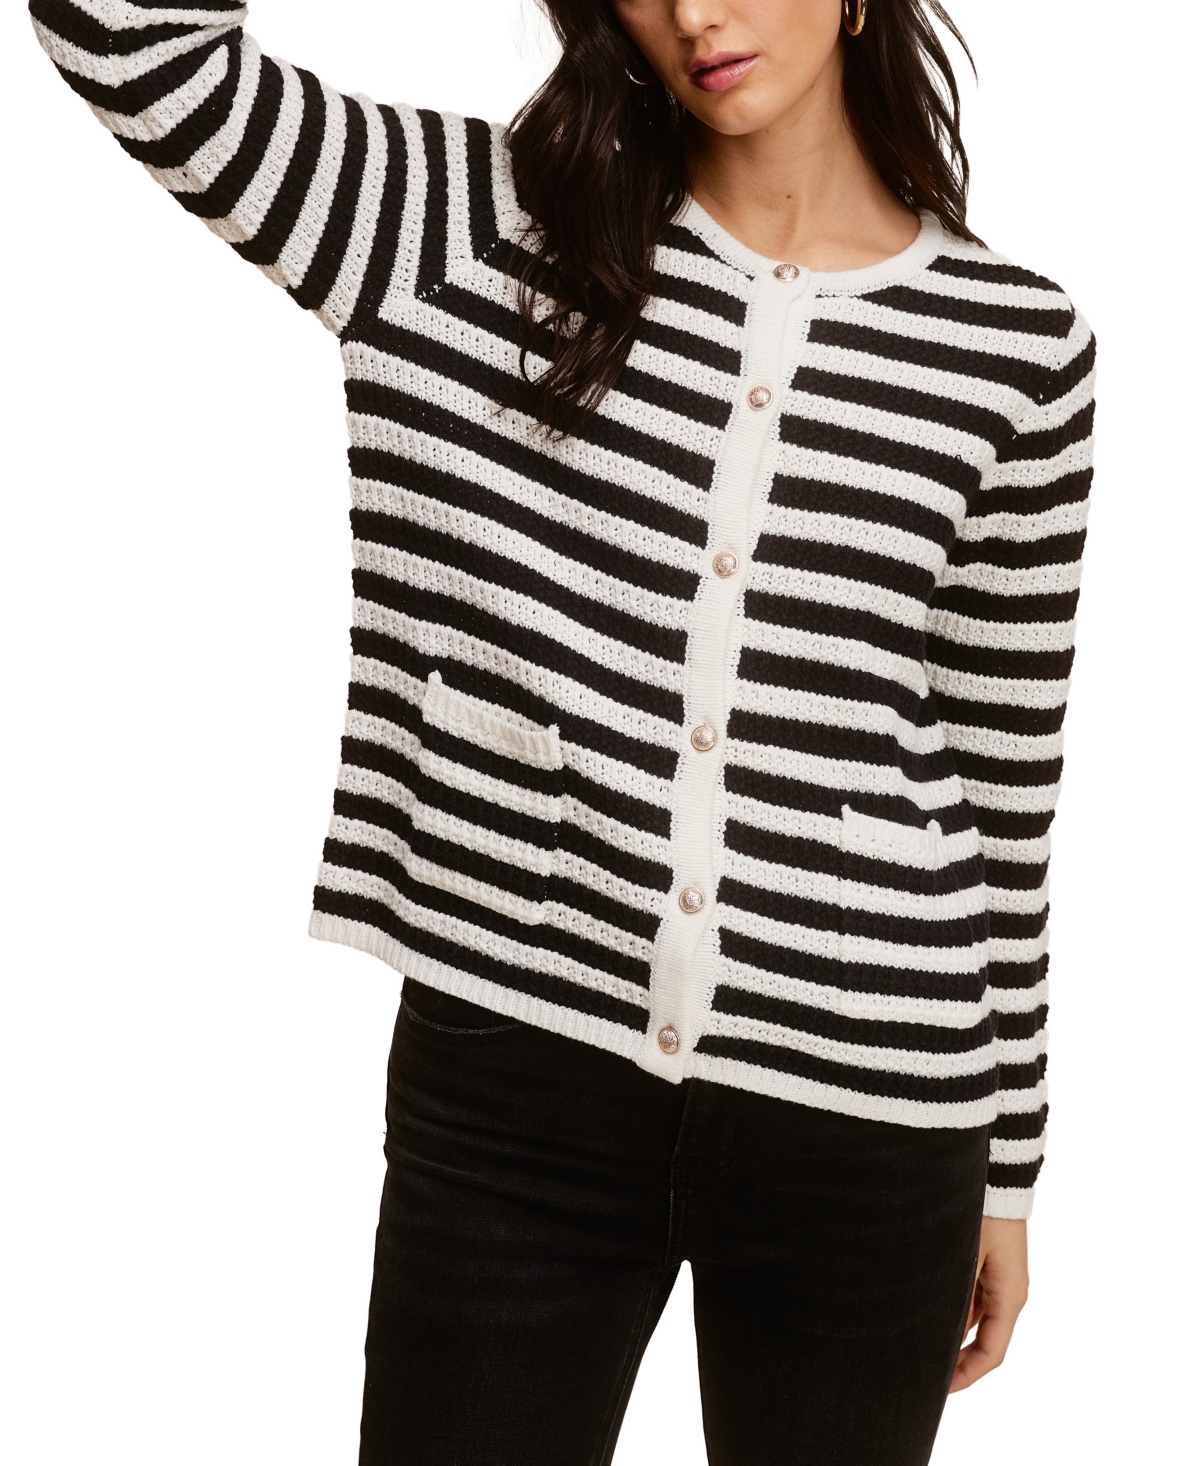 Striped Cardigan With Gold Buttons - BLACK IVORY